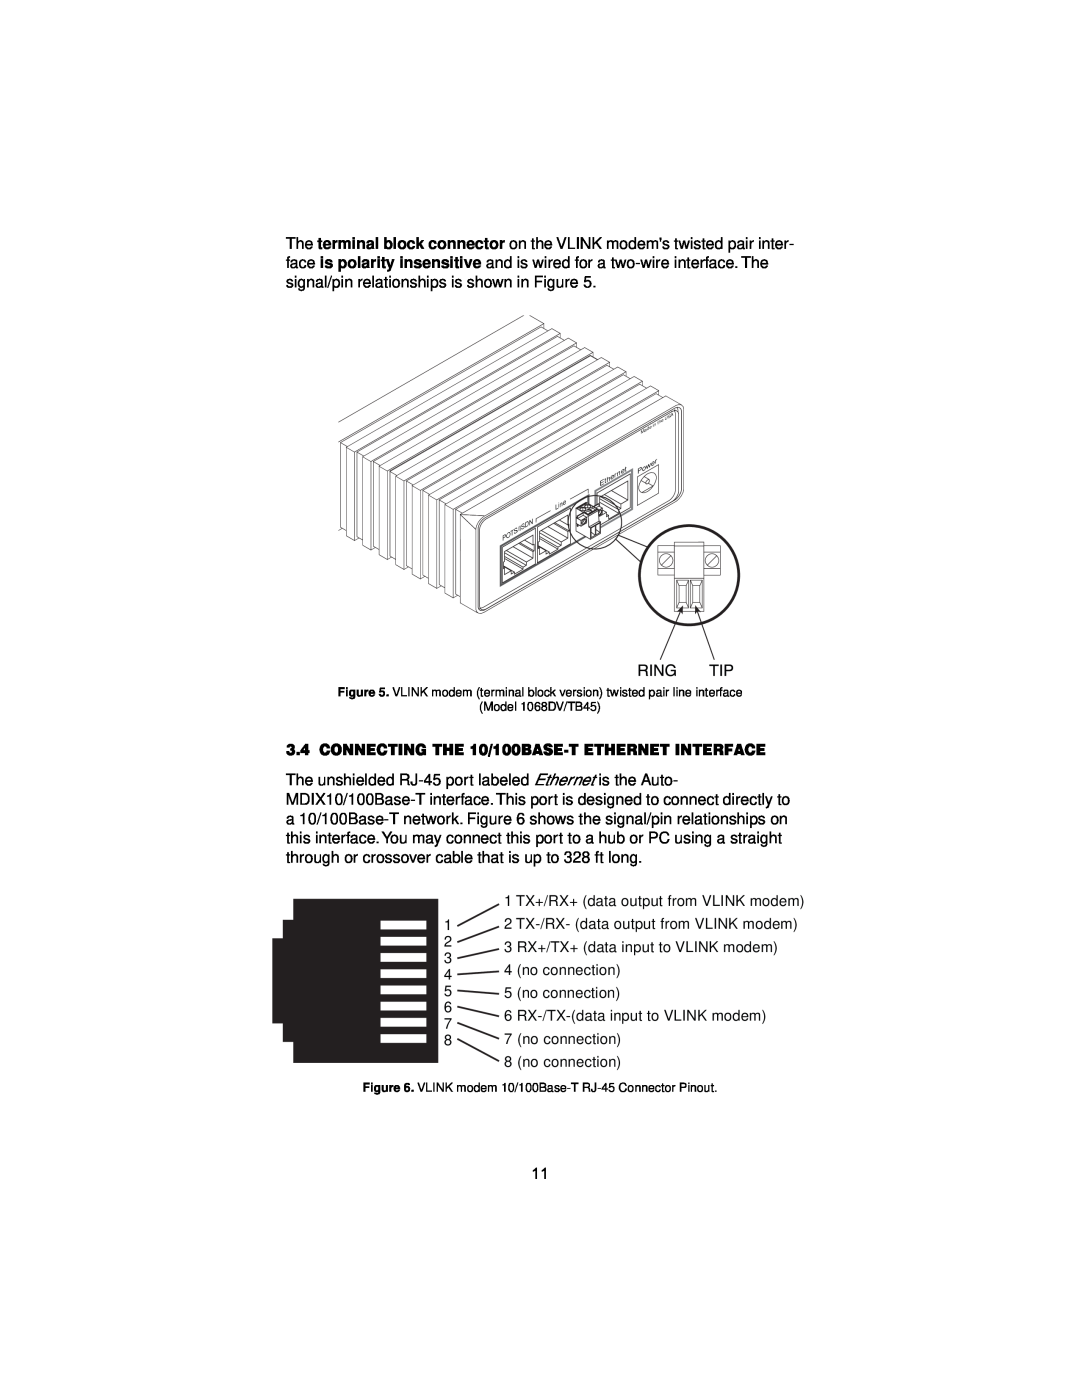 Patton electronic 1068 user manual CONNECTING THE 10/100BASE-T ETHERNET INTERFACE, 1 TX+/RX+ data output from VLINK modem 